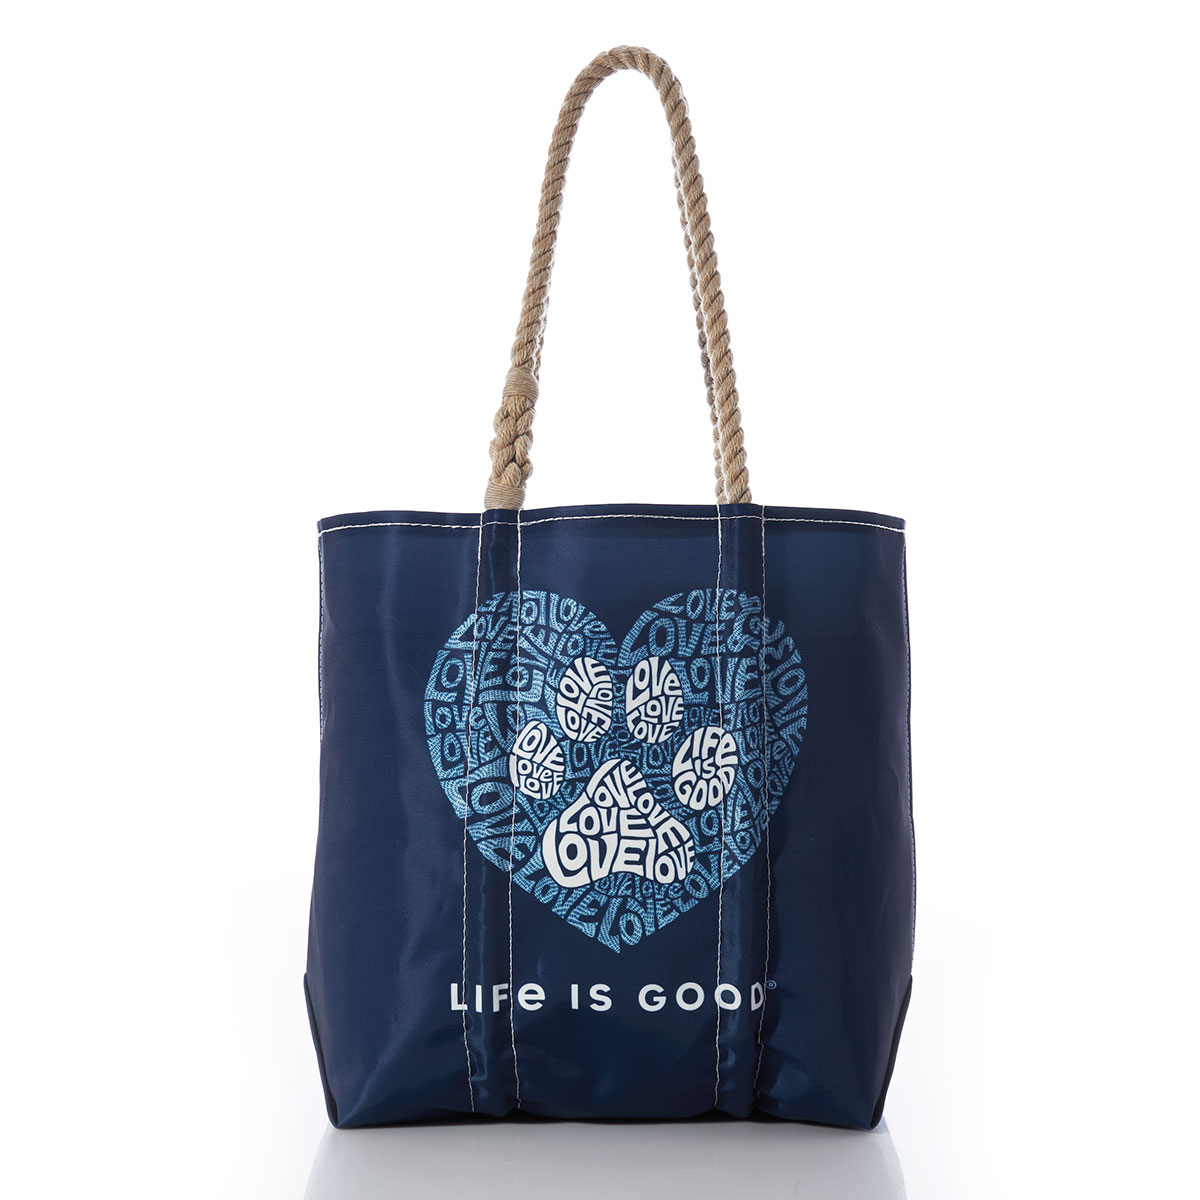 white paw print made of words inside light blue heart print made of words on navy recycled sail cloth medium tote with hemp rope handles